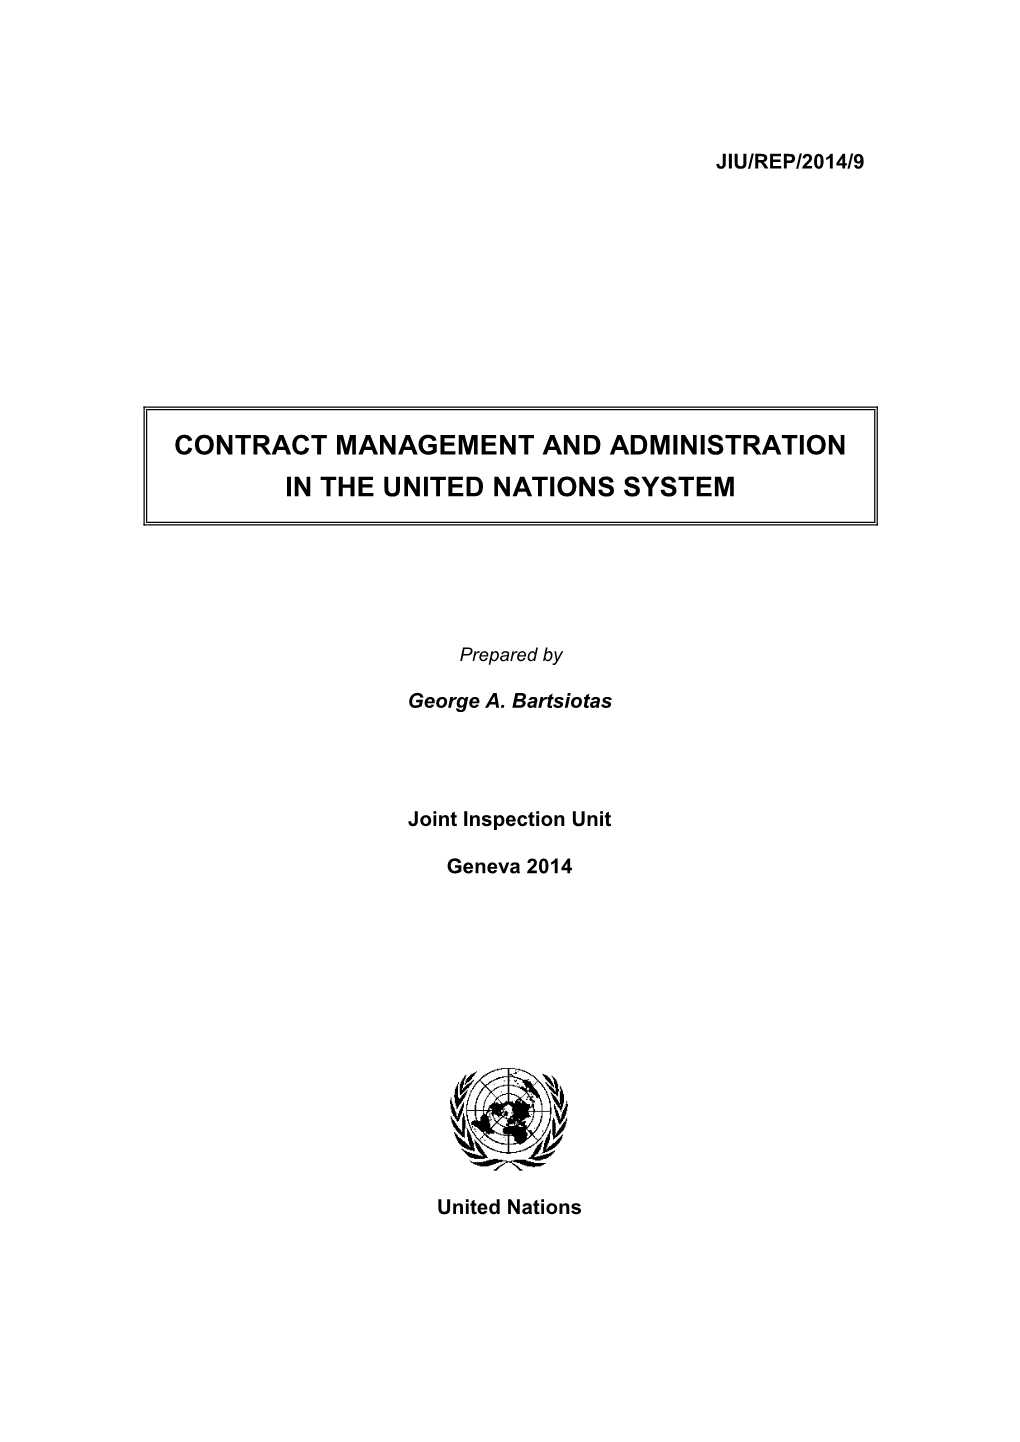 Contract Management and Administration in the United Nations System